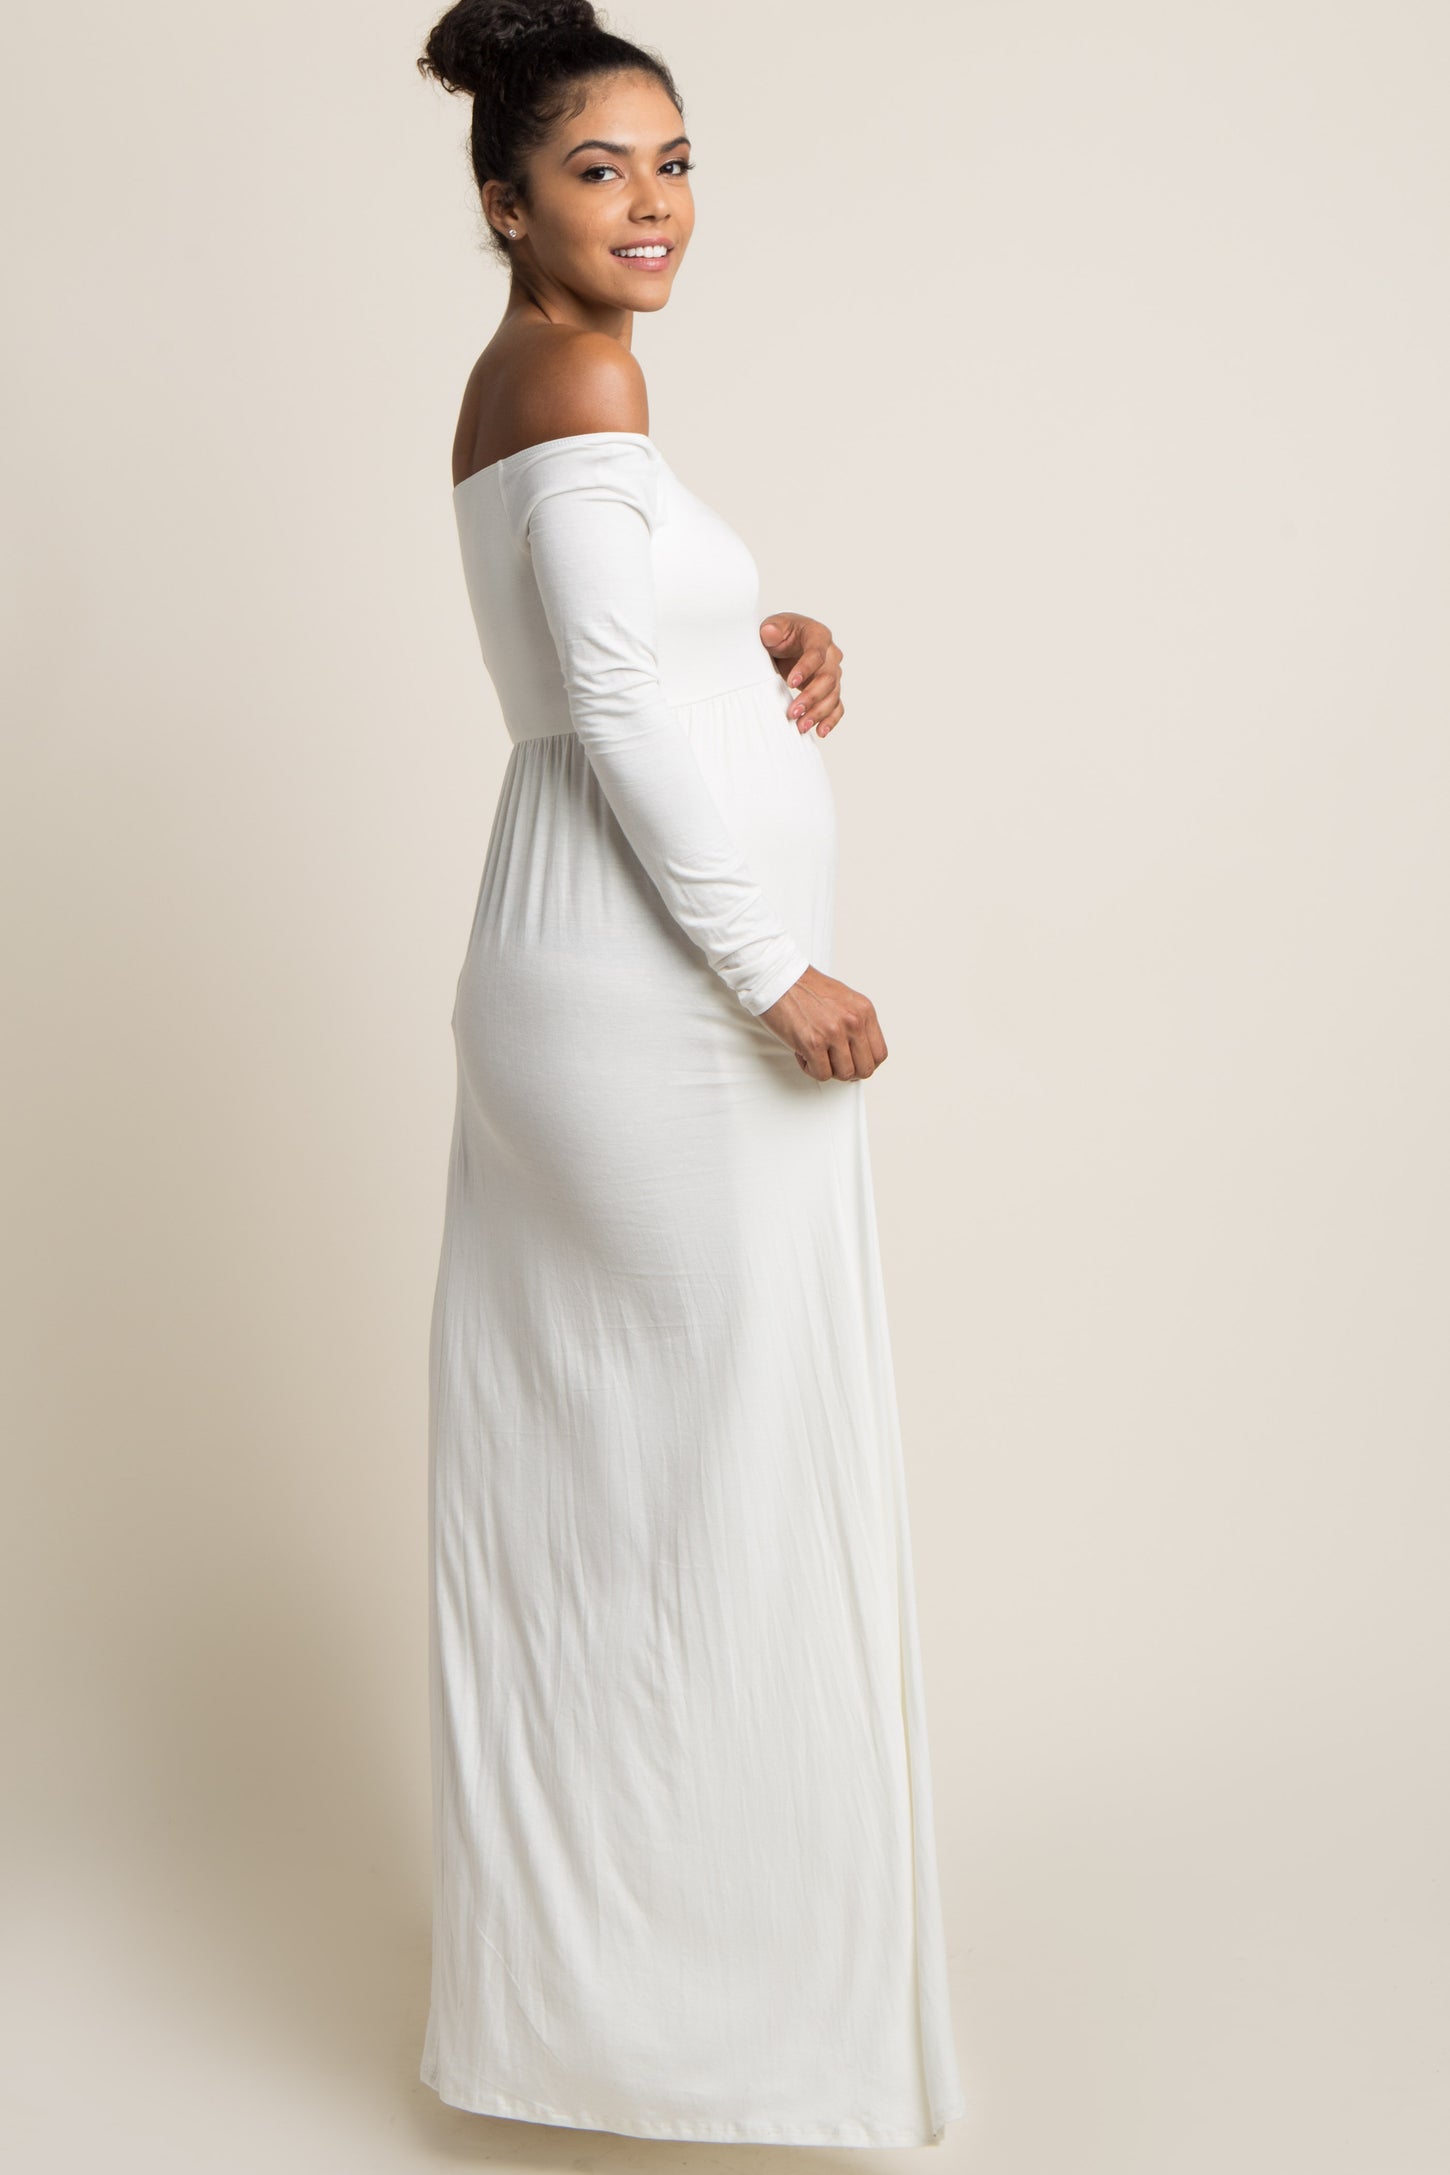 PinkBlush Tall Ivory Solid Off Shoulder Maternity Maxi Dress